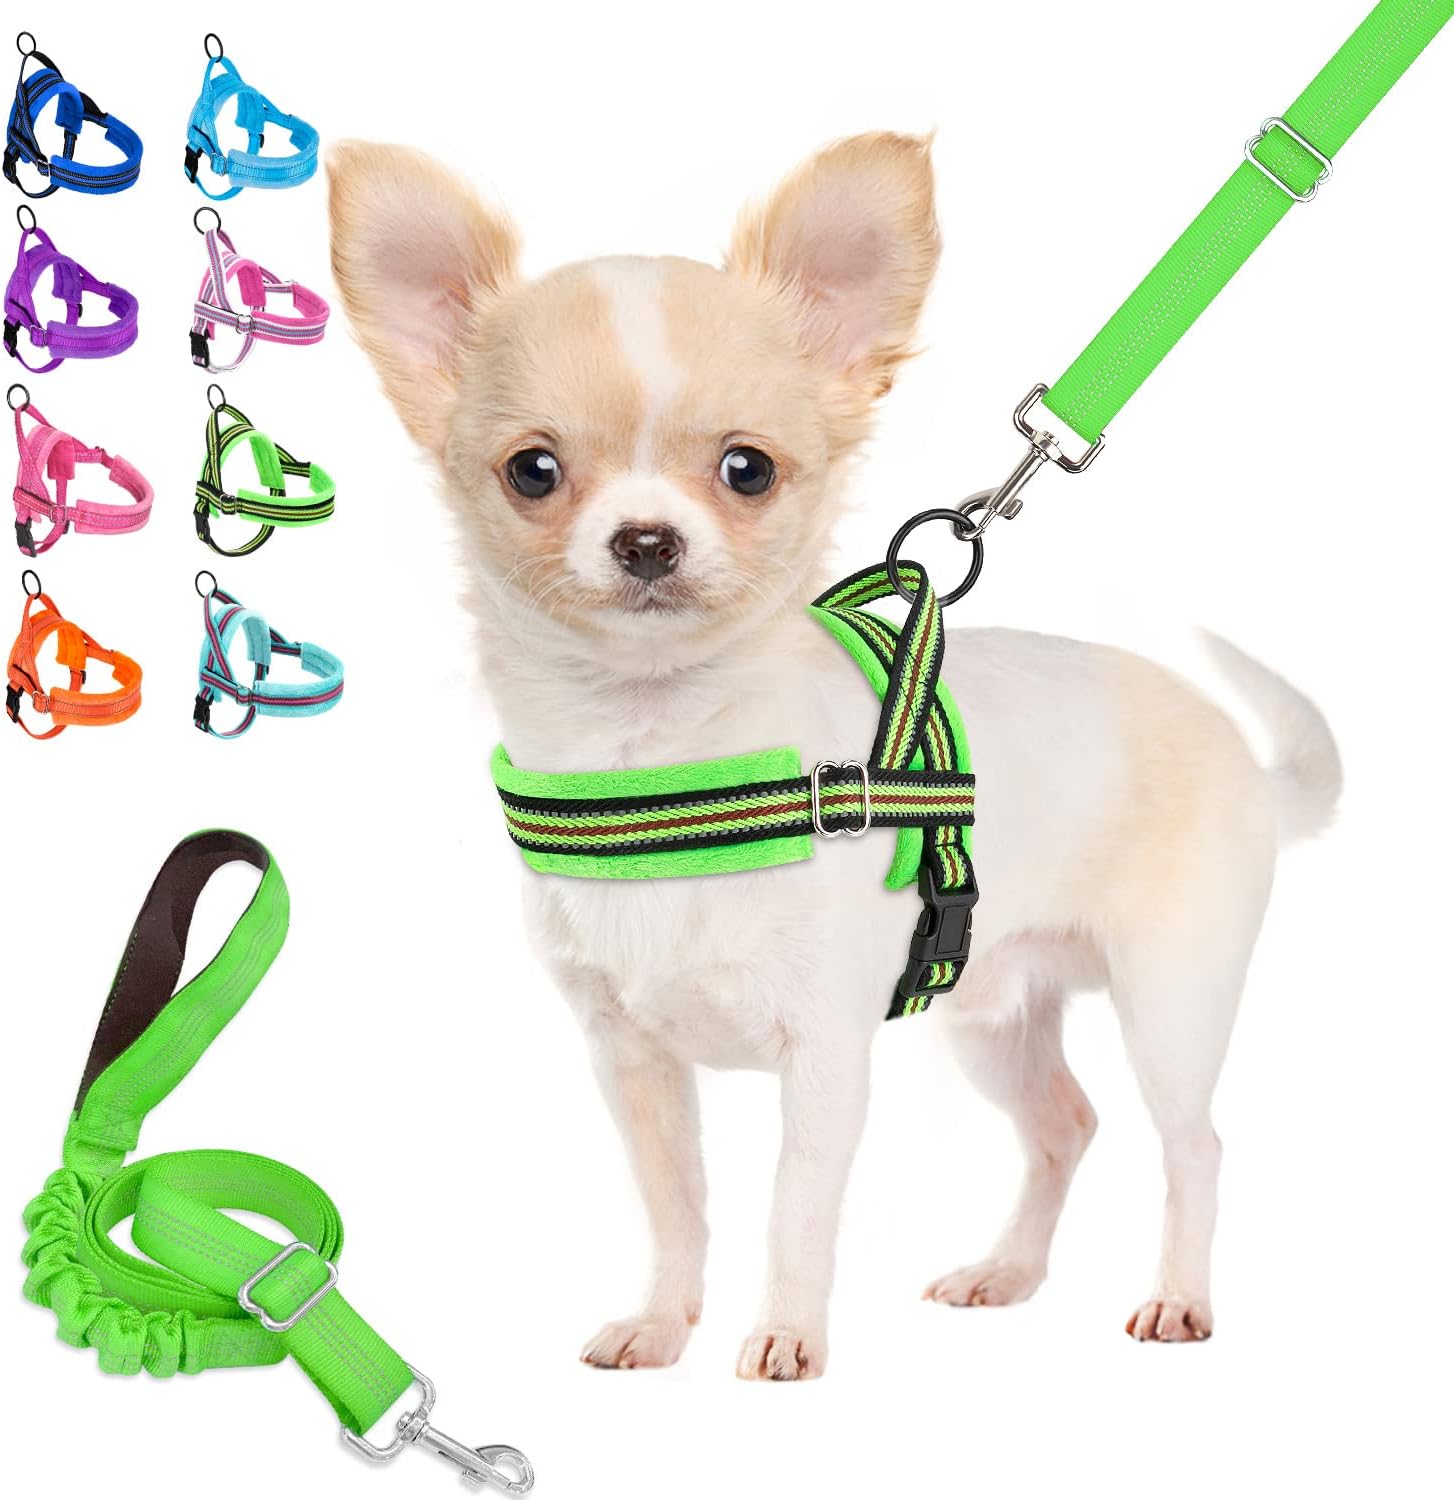 Lukovee Dog Harness and Leash Set, Soft Padded Small Dog Harness, Neck  Chest Adjustable Reflective Vest Puppy Harness with 4ft Lightweight Anti-Twist Dog Leash for Small Dogs (Orange, XX-Small)